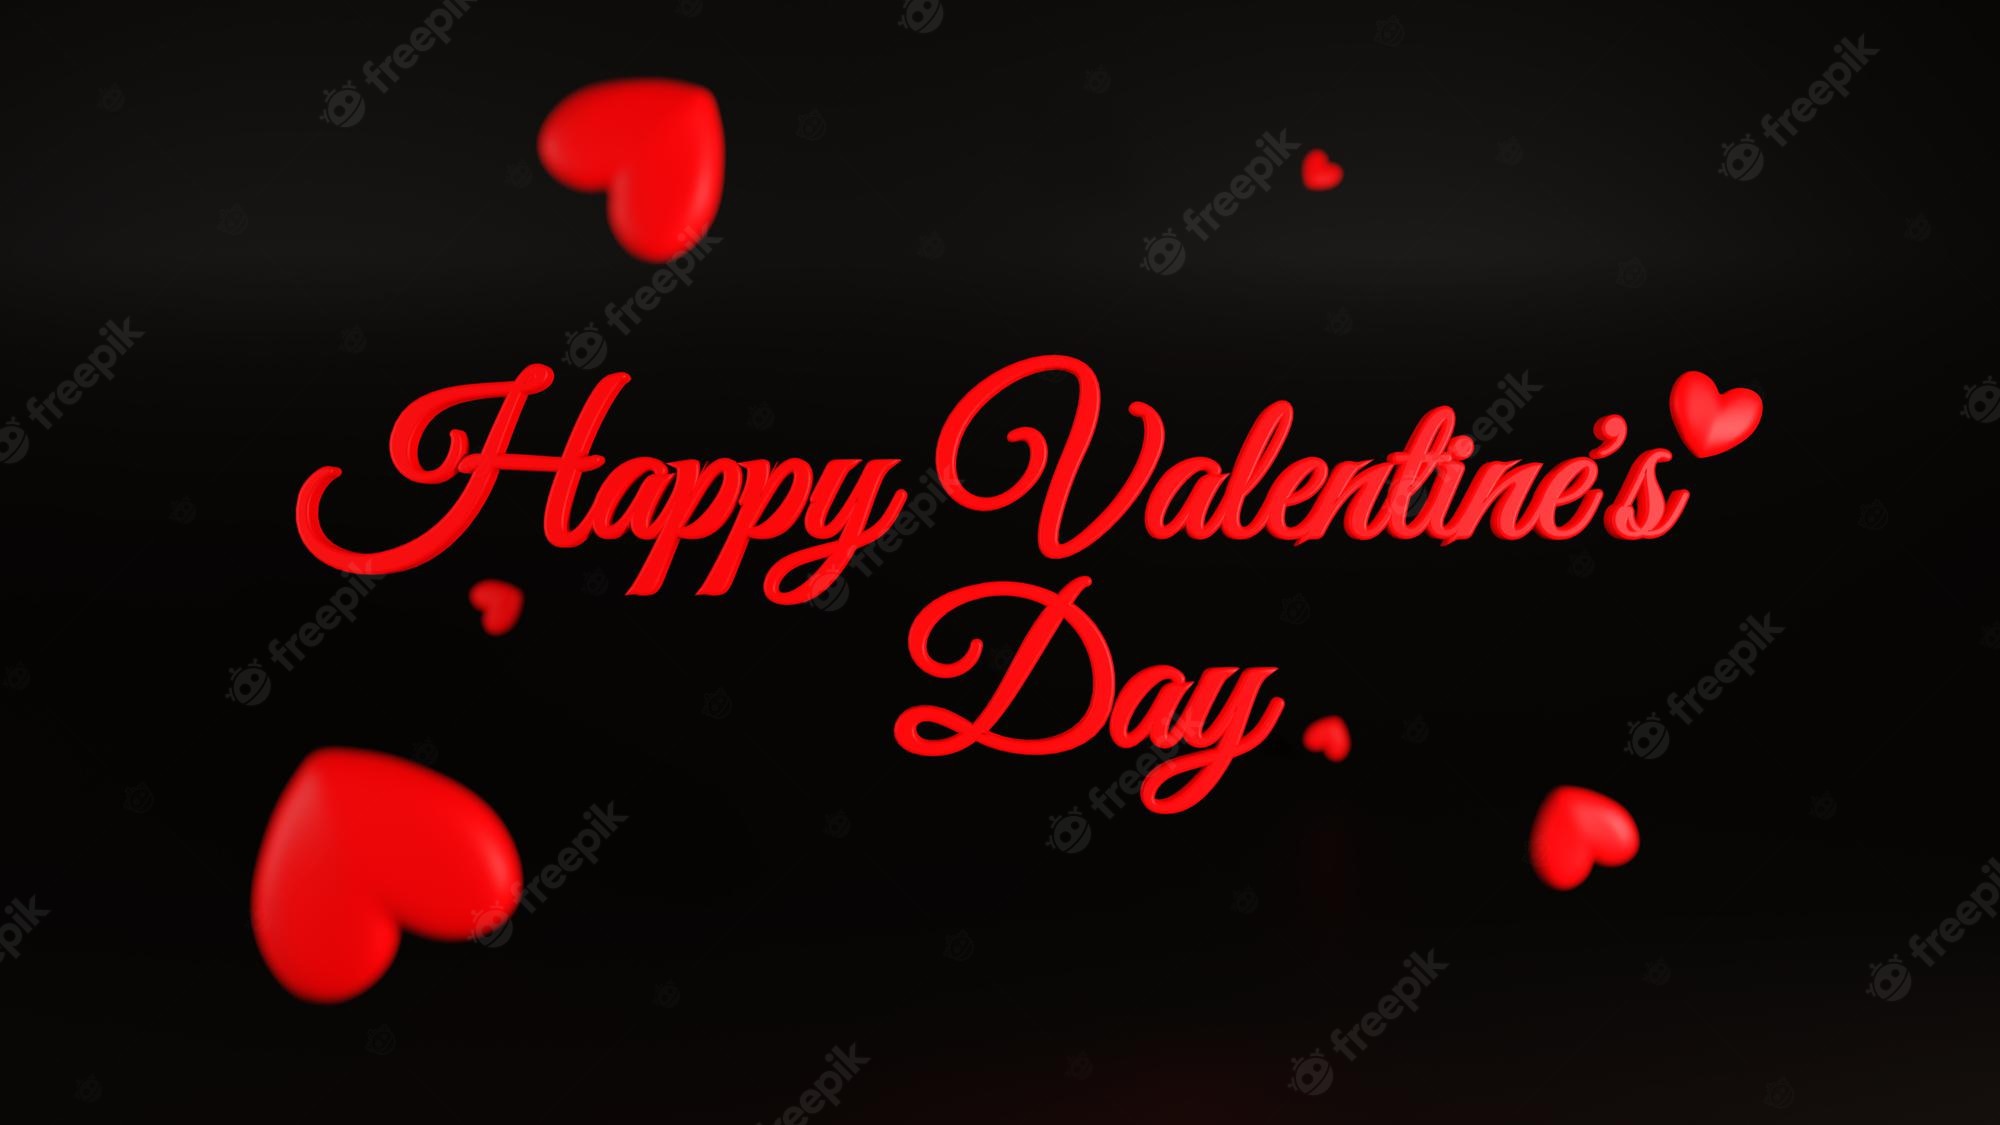 Premium Photo. Happy valentines day 3D text with red heart and black background